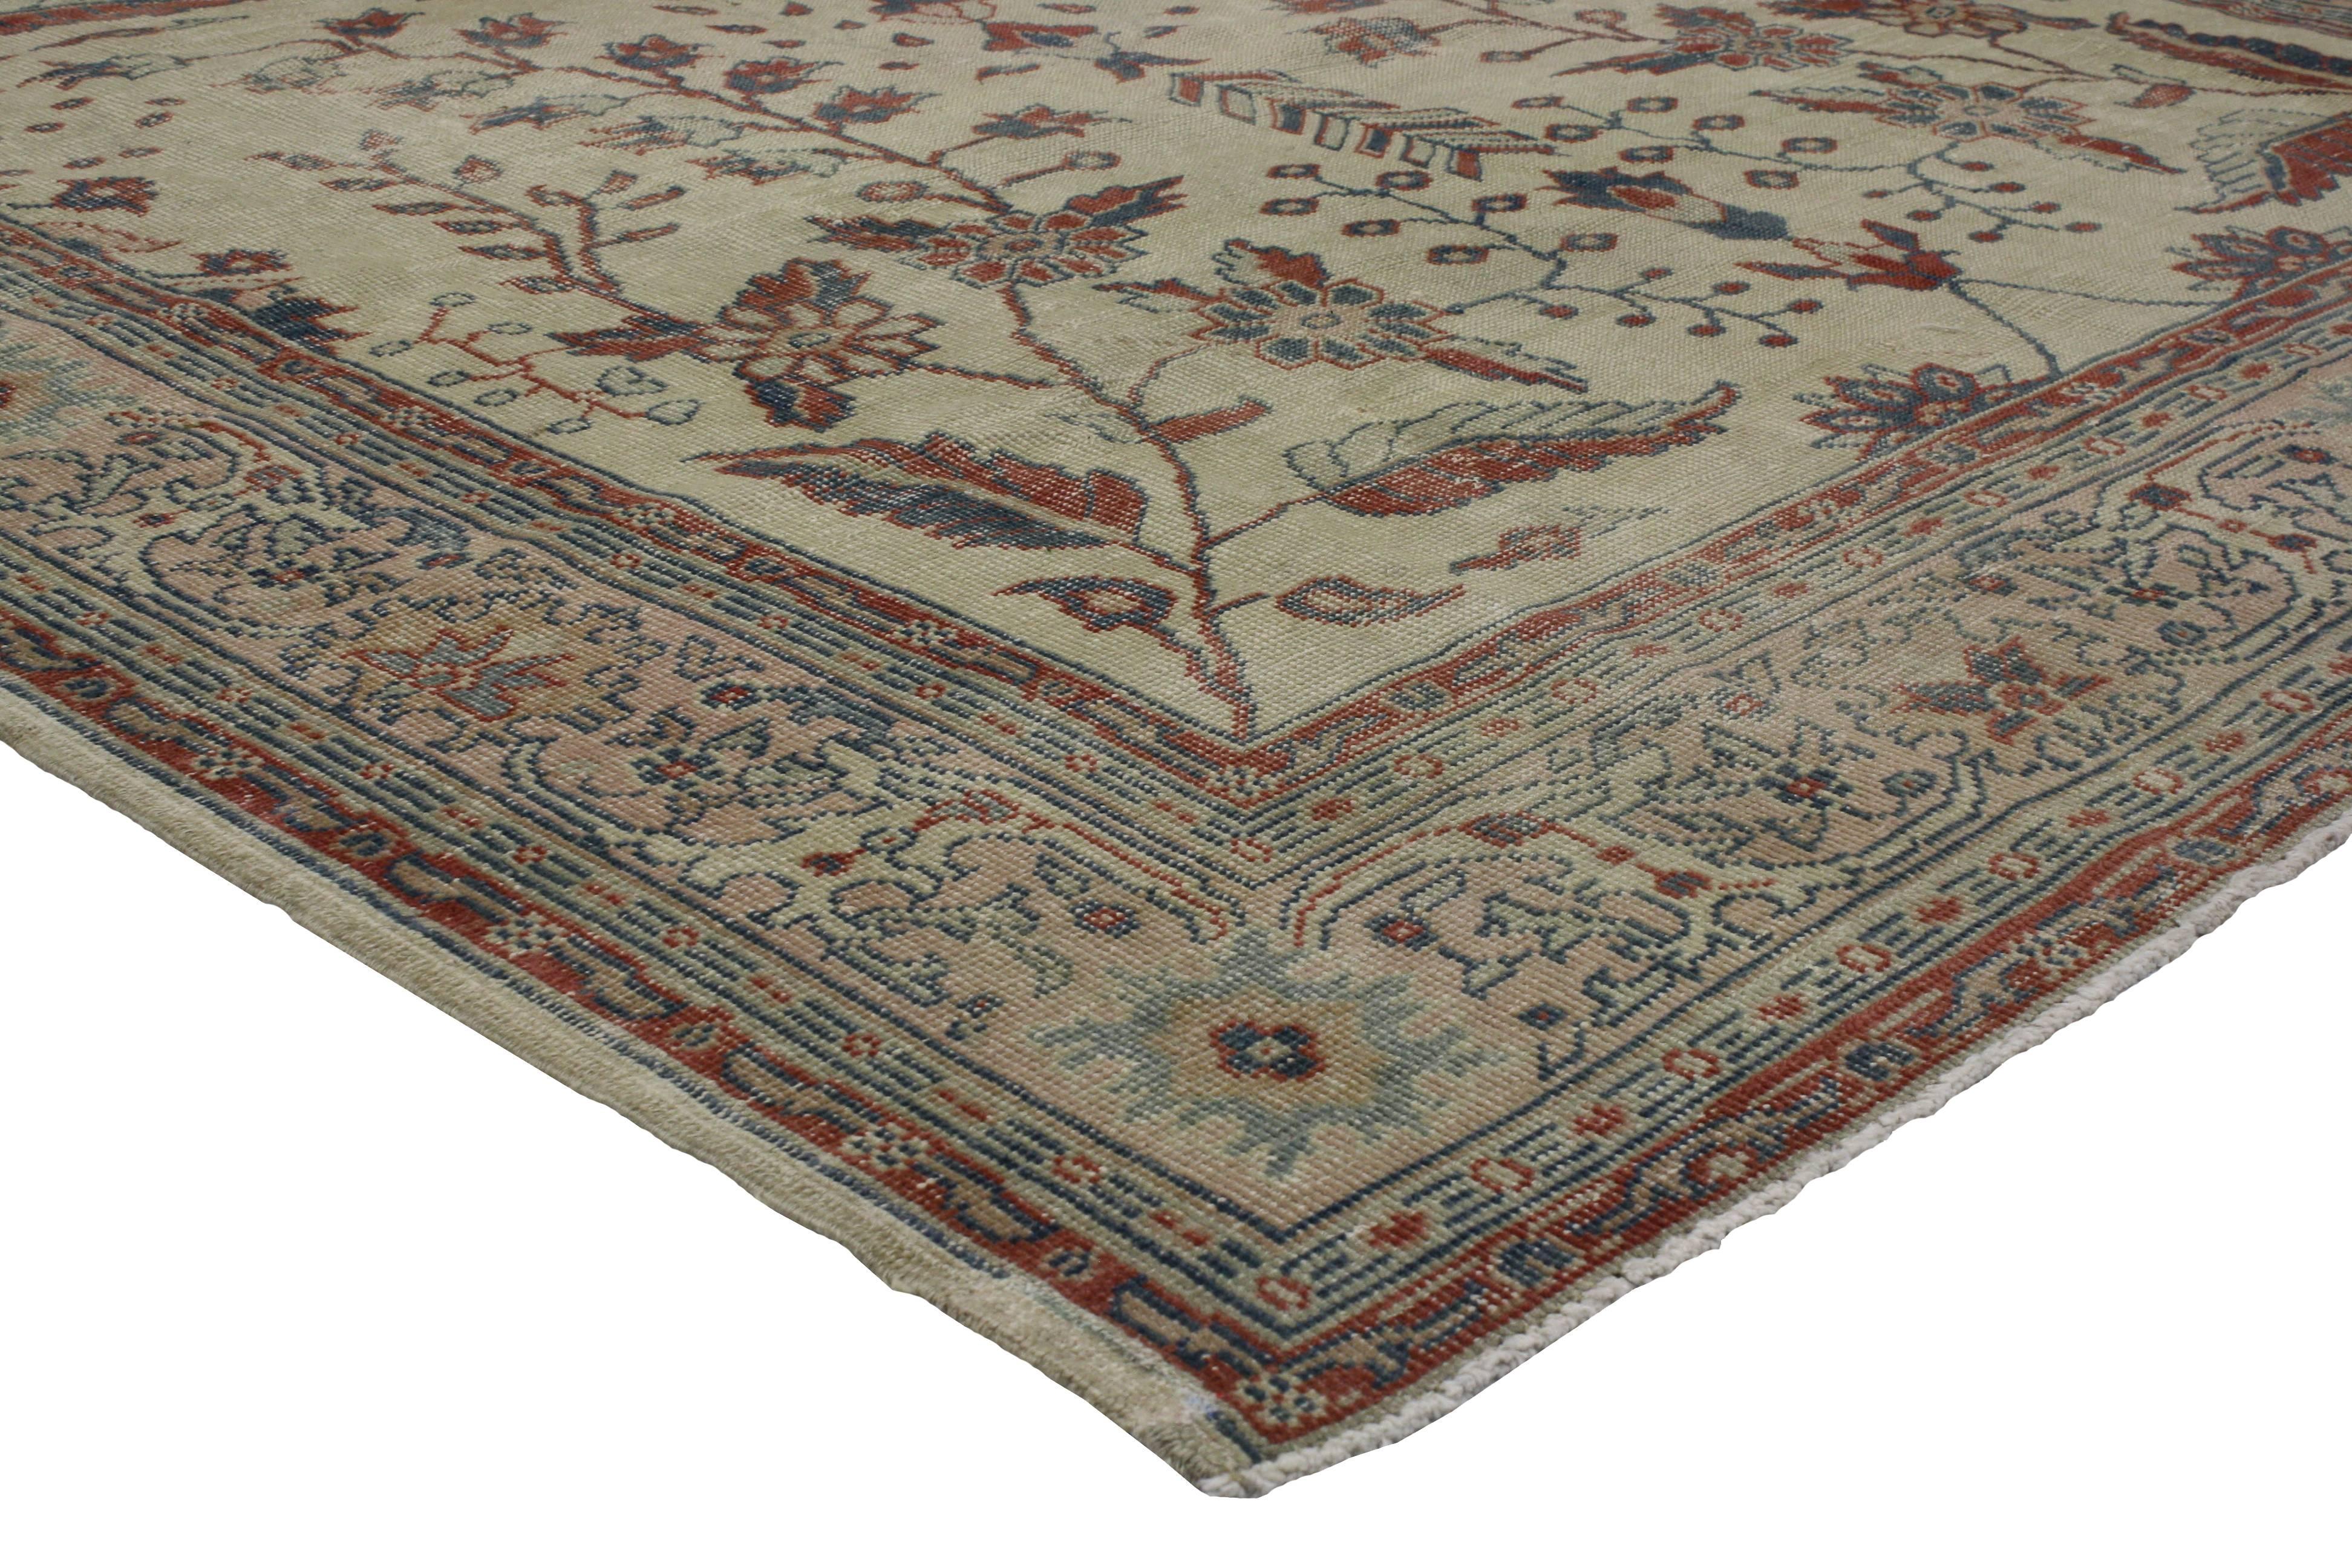 Here is a beautifully woven vintage Turkish Sivas rug, highlighting classical elements that are reminiscent of Persian design. The field boasts a regal pattern of rectilinear florals, blossoms, leaves, vines and palmettes in variegated shades of